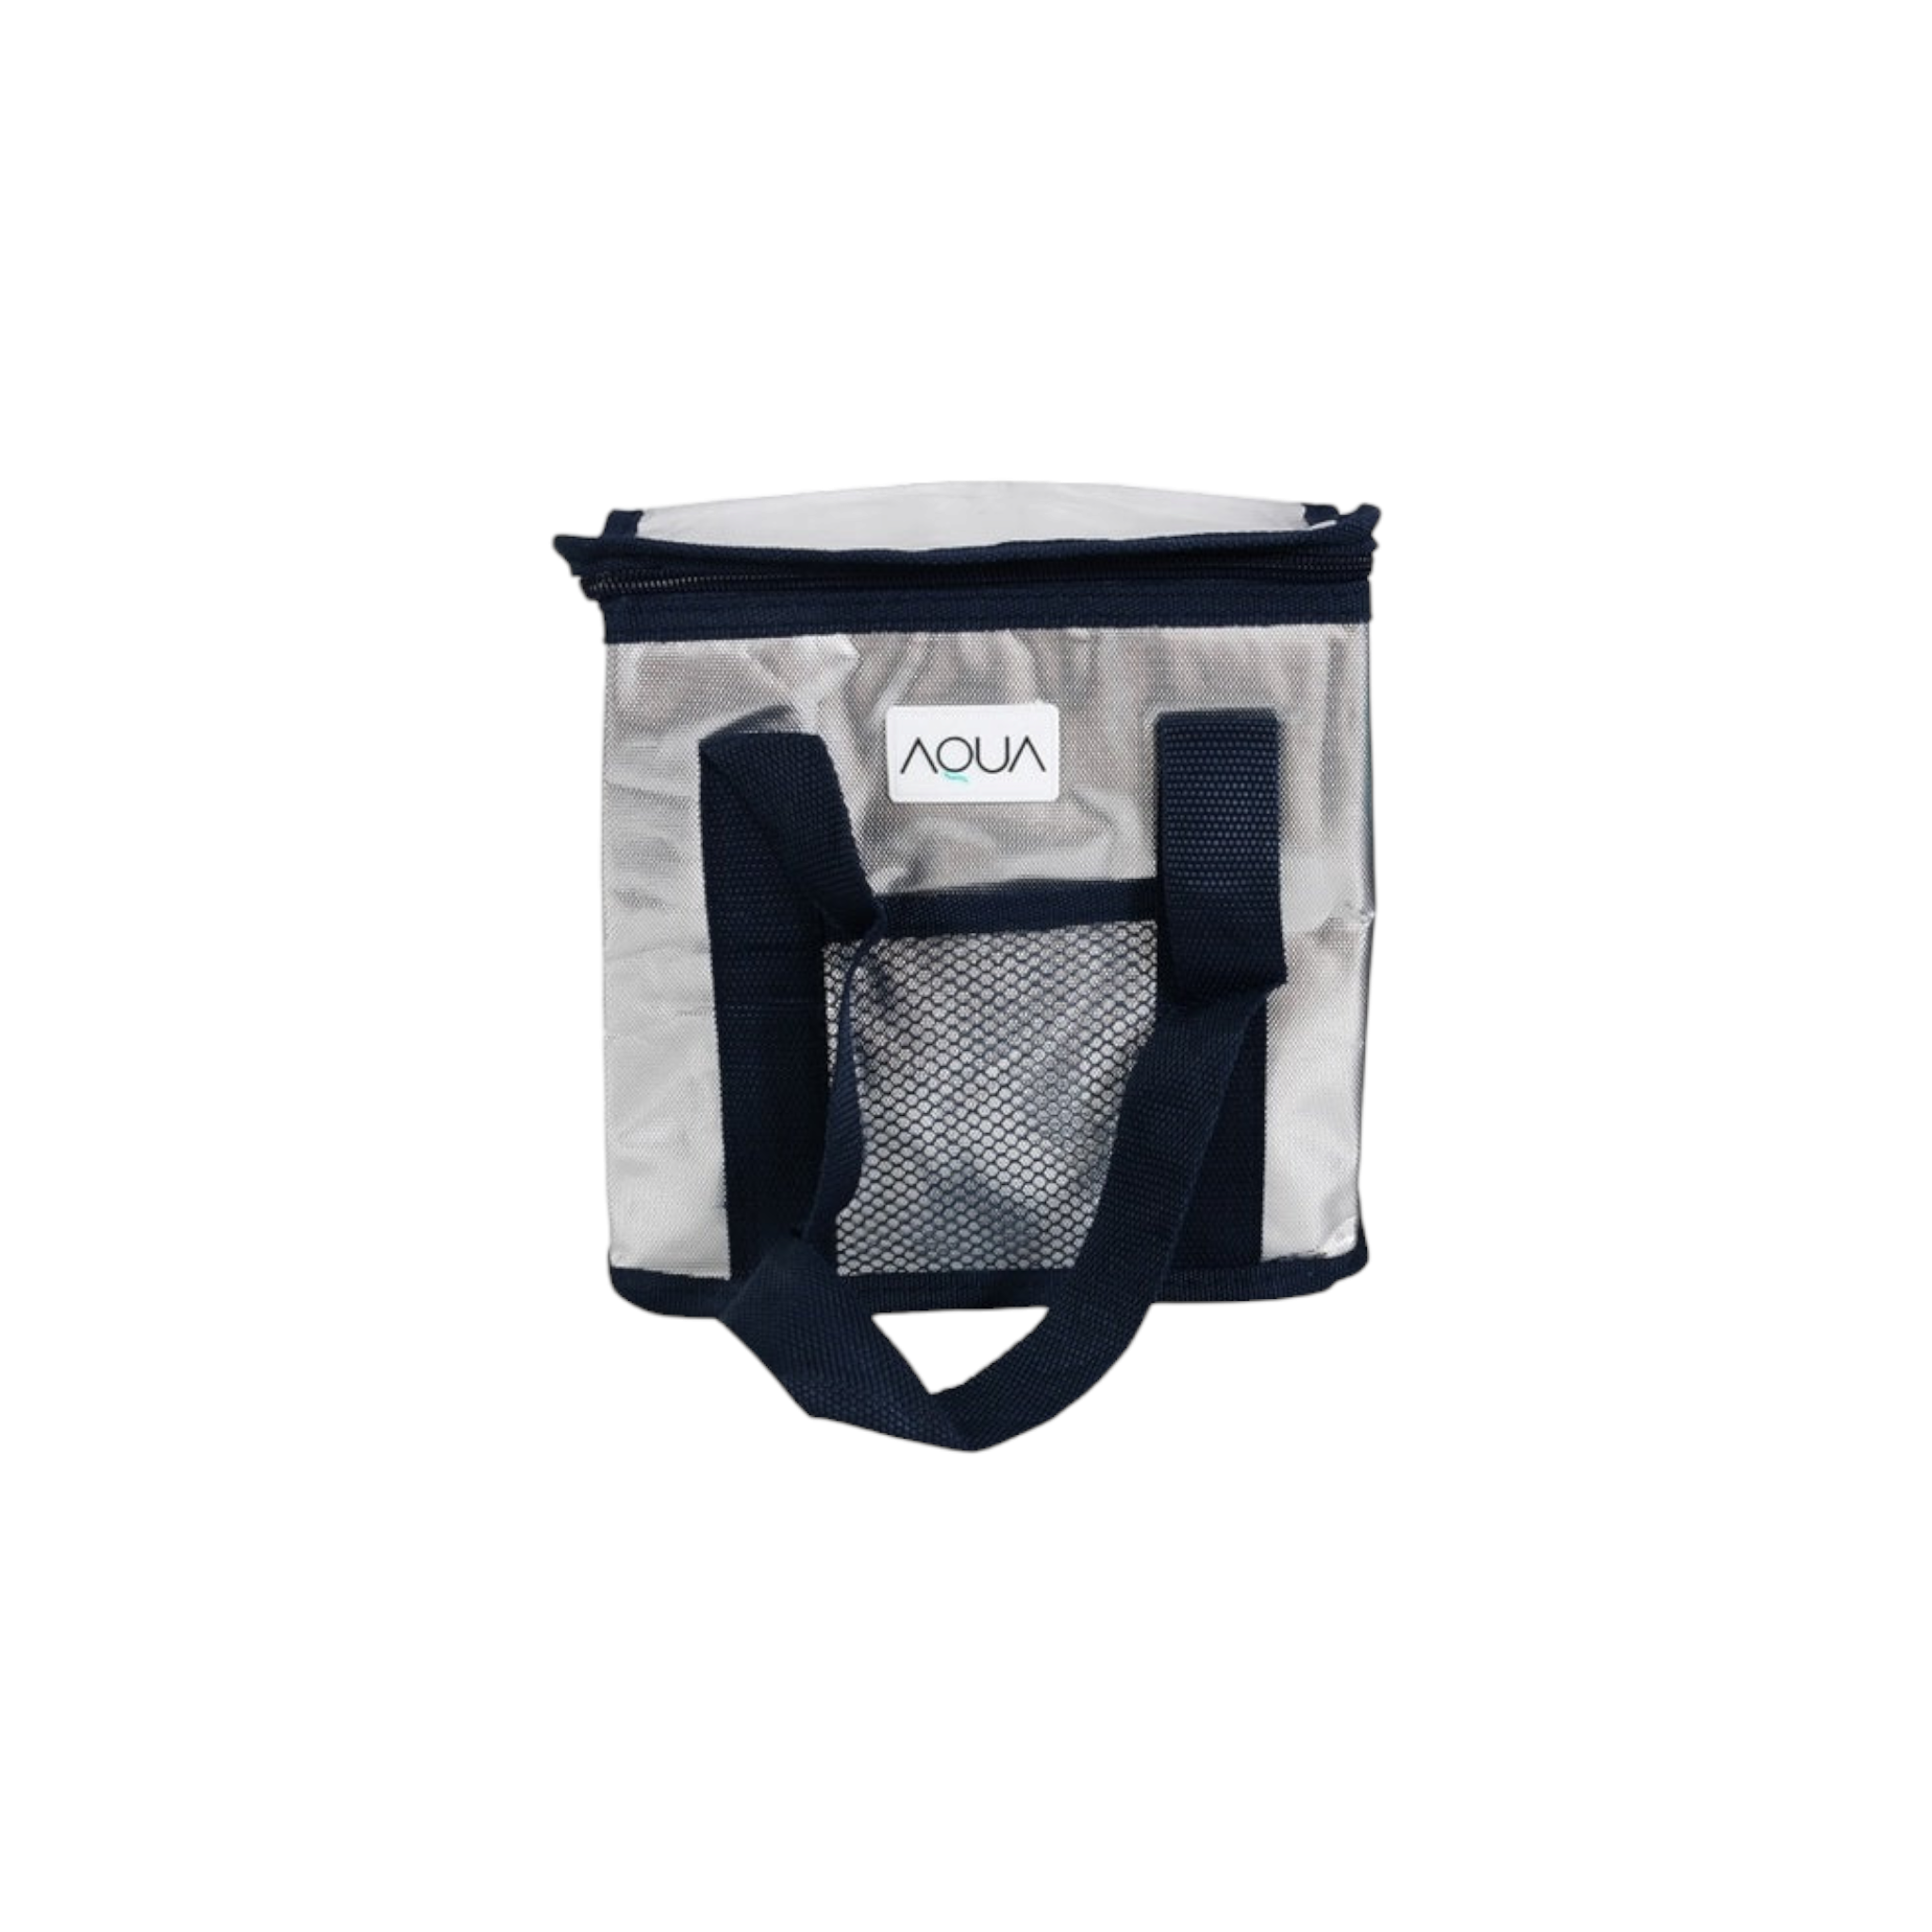 Aqua 5L Insulated Thermal Cooler Lunch Bag 34507